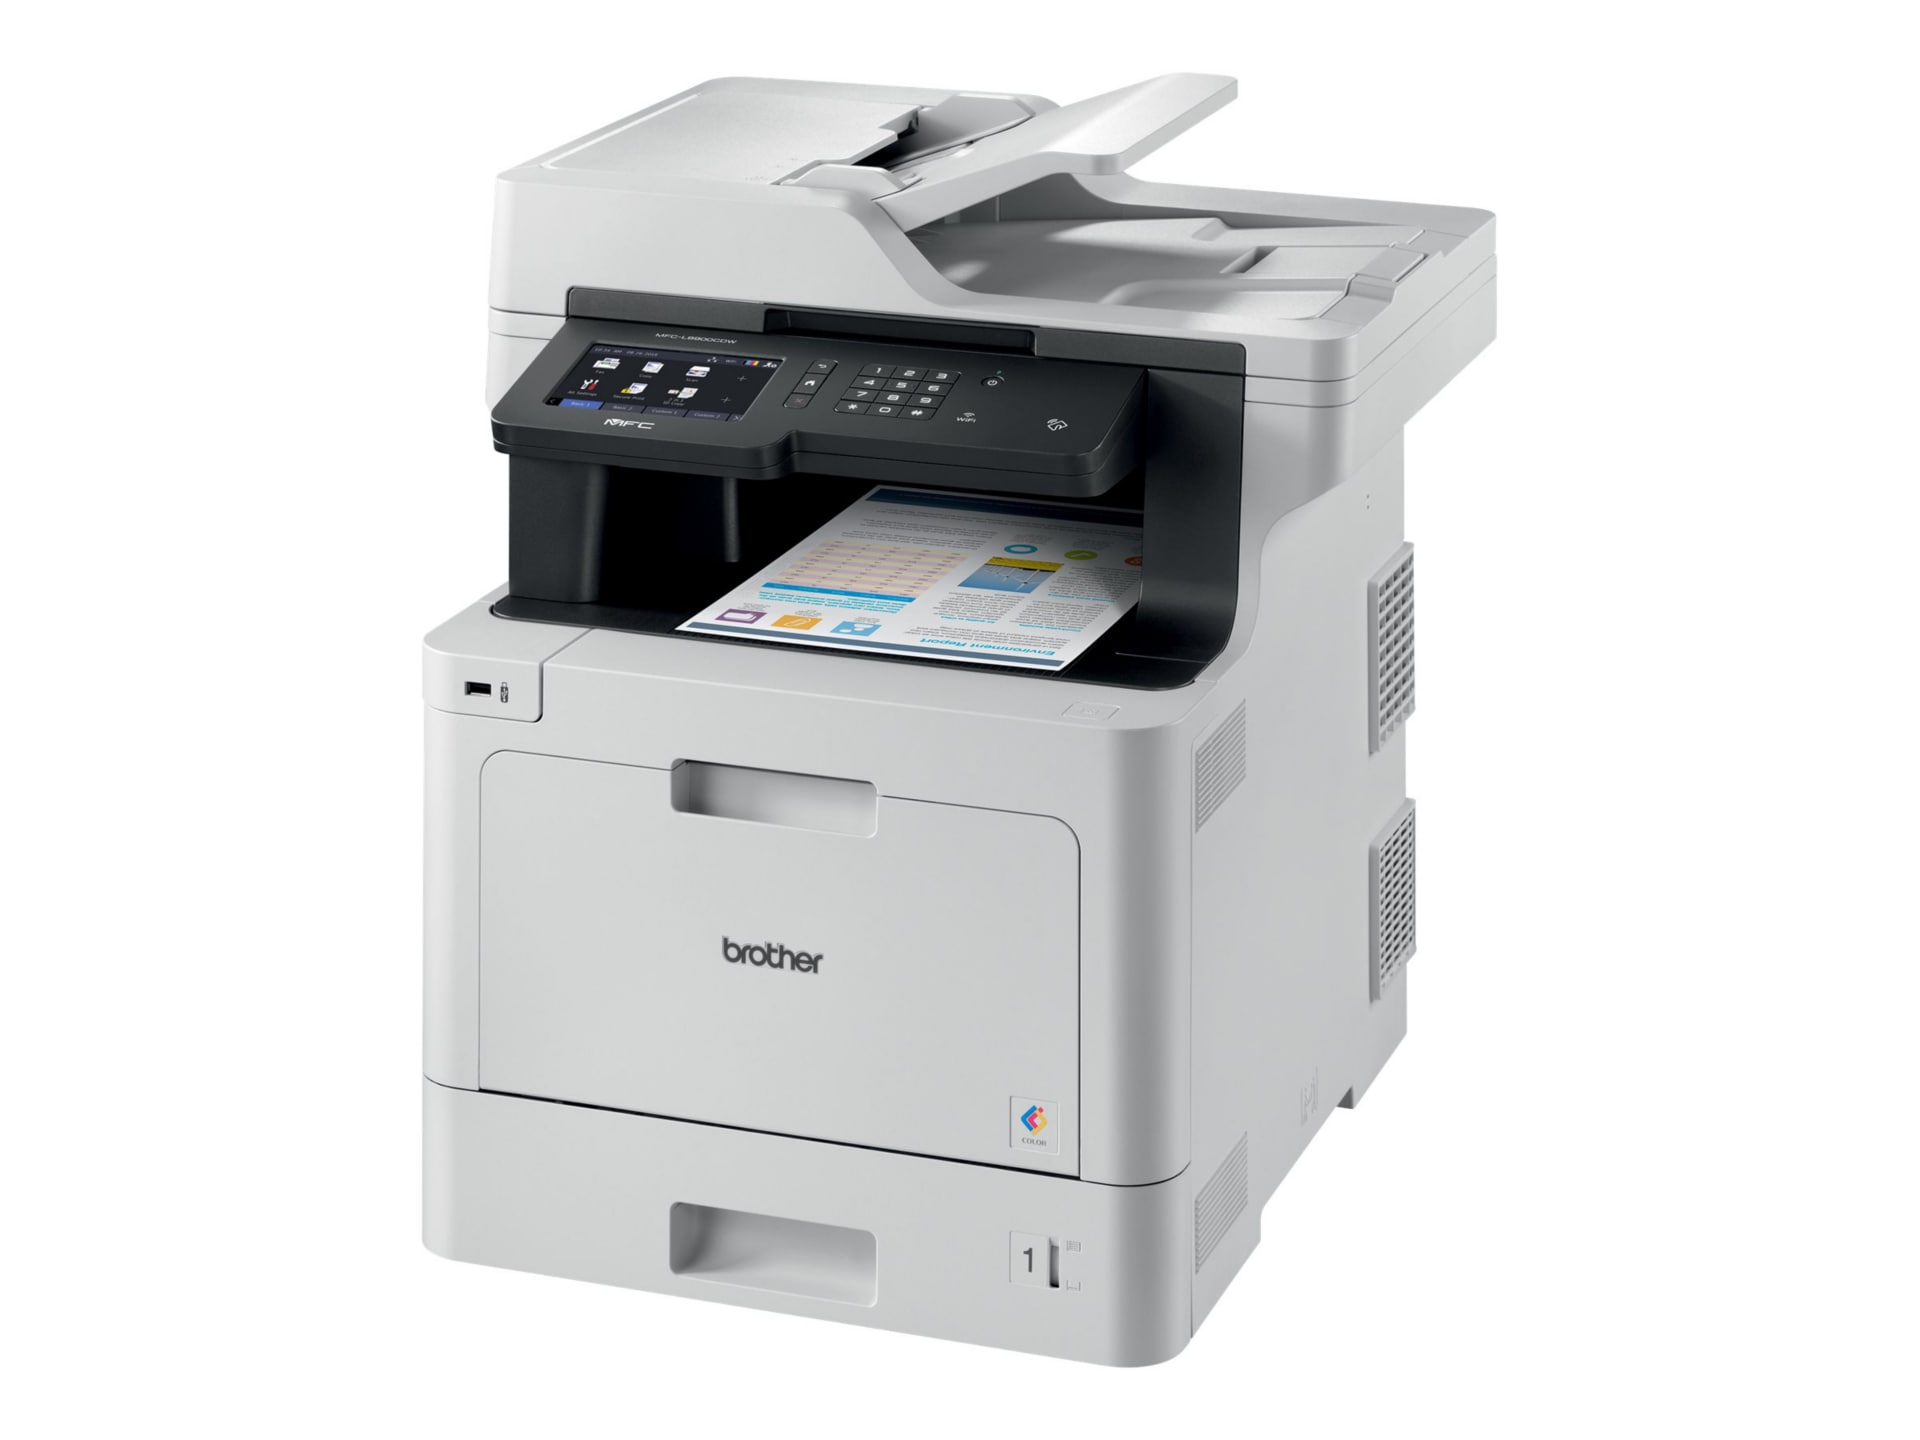 Brother MFC-L8900CDW - multifunction printer - color - MFCL8900CDW -  All-in-One Printers 